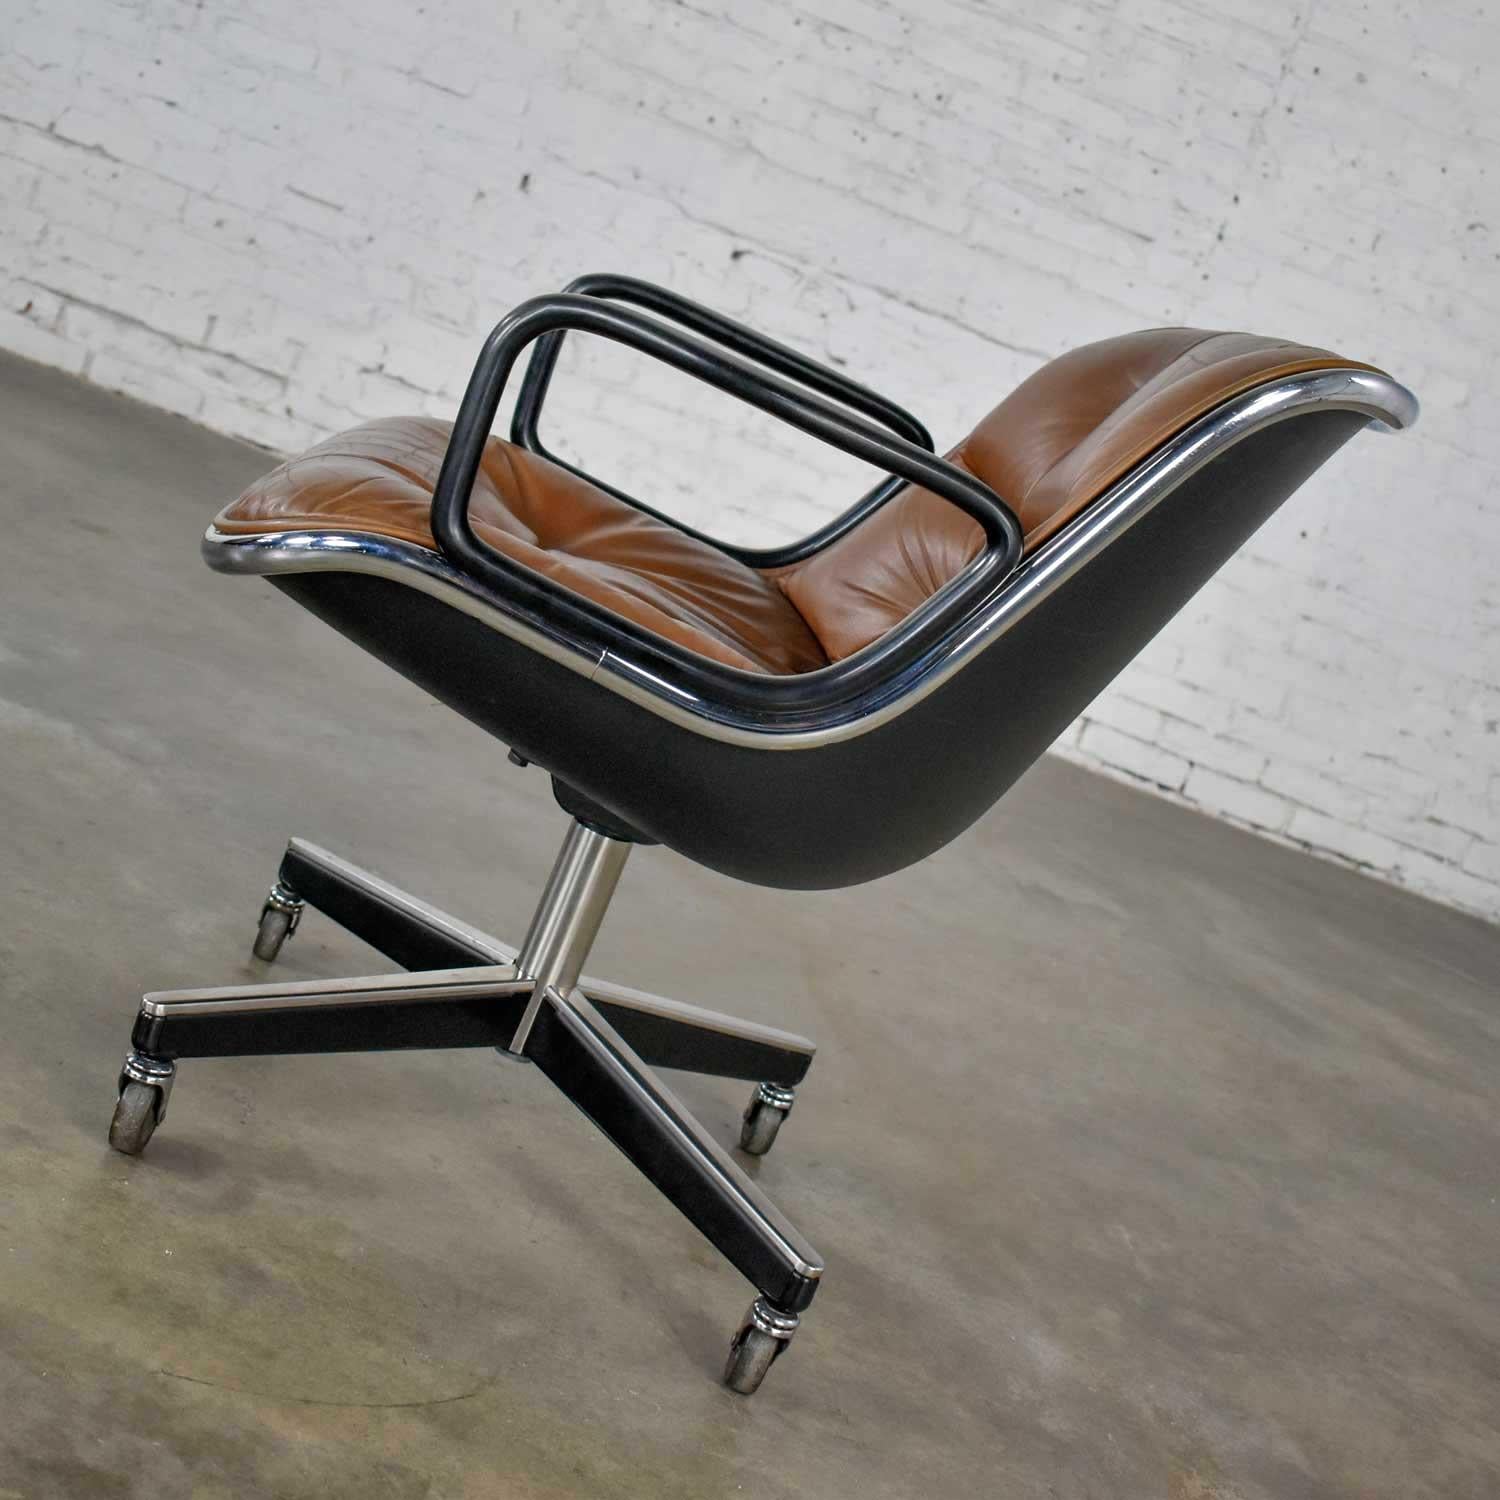 20th Century Executive Armchair by Charles Pollock for Knoll Brown Leather with 4 Prong Base